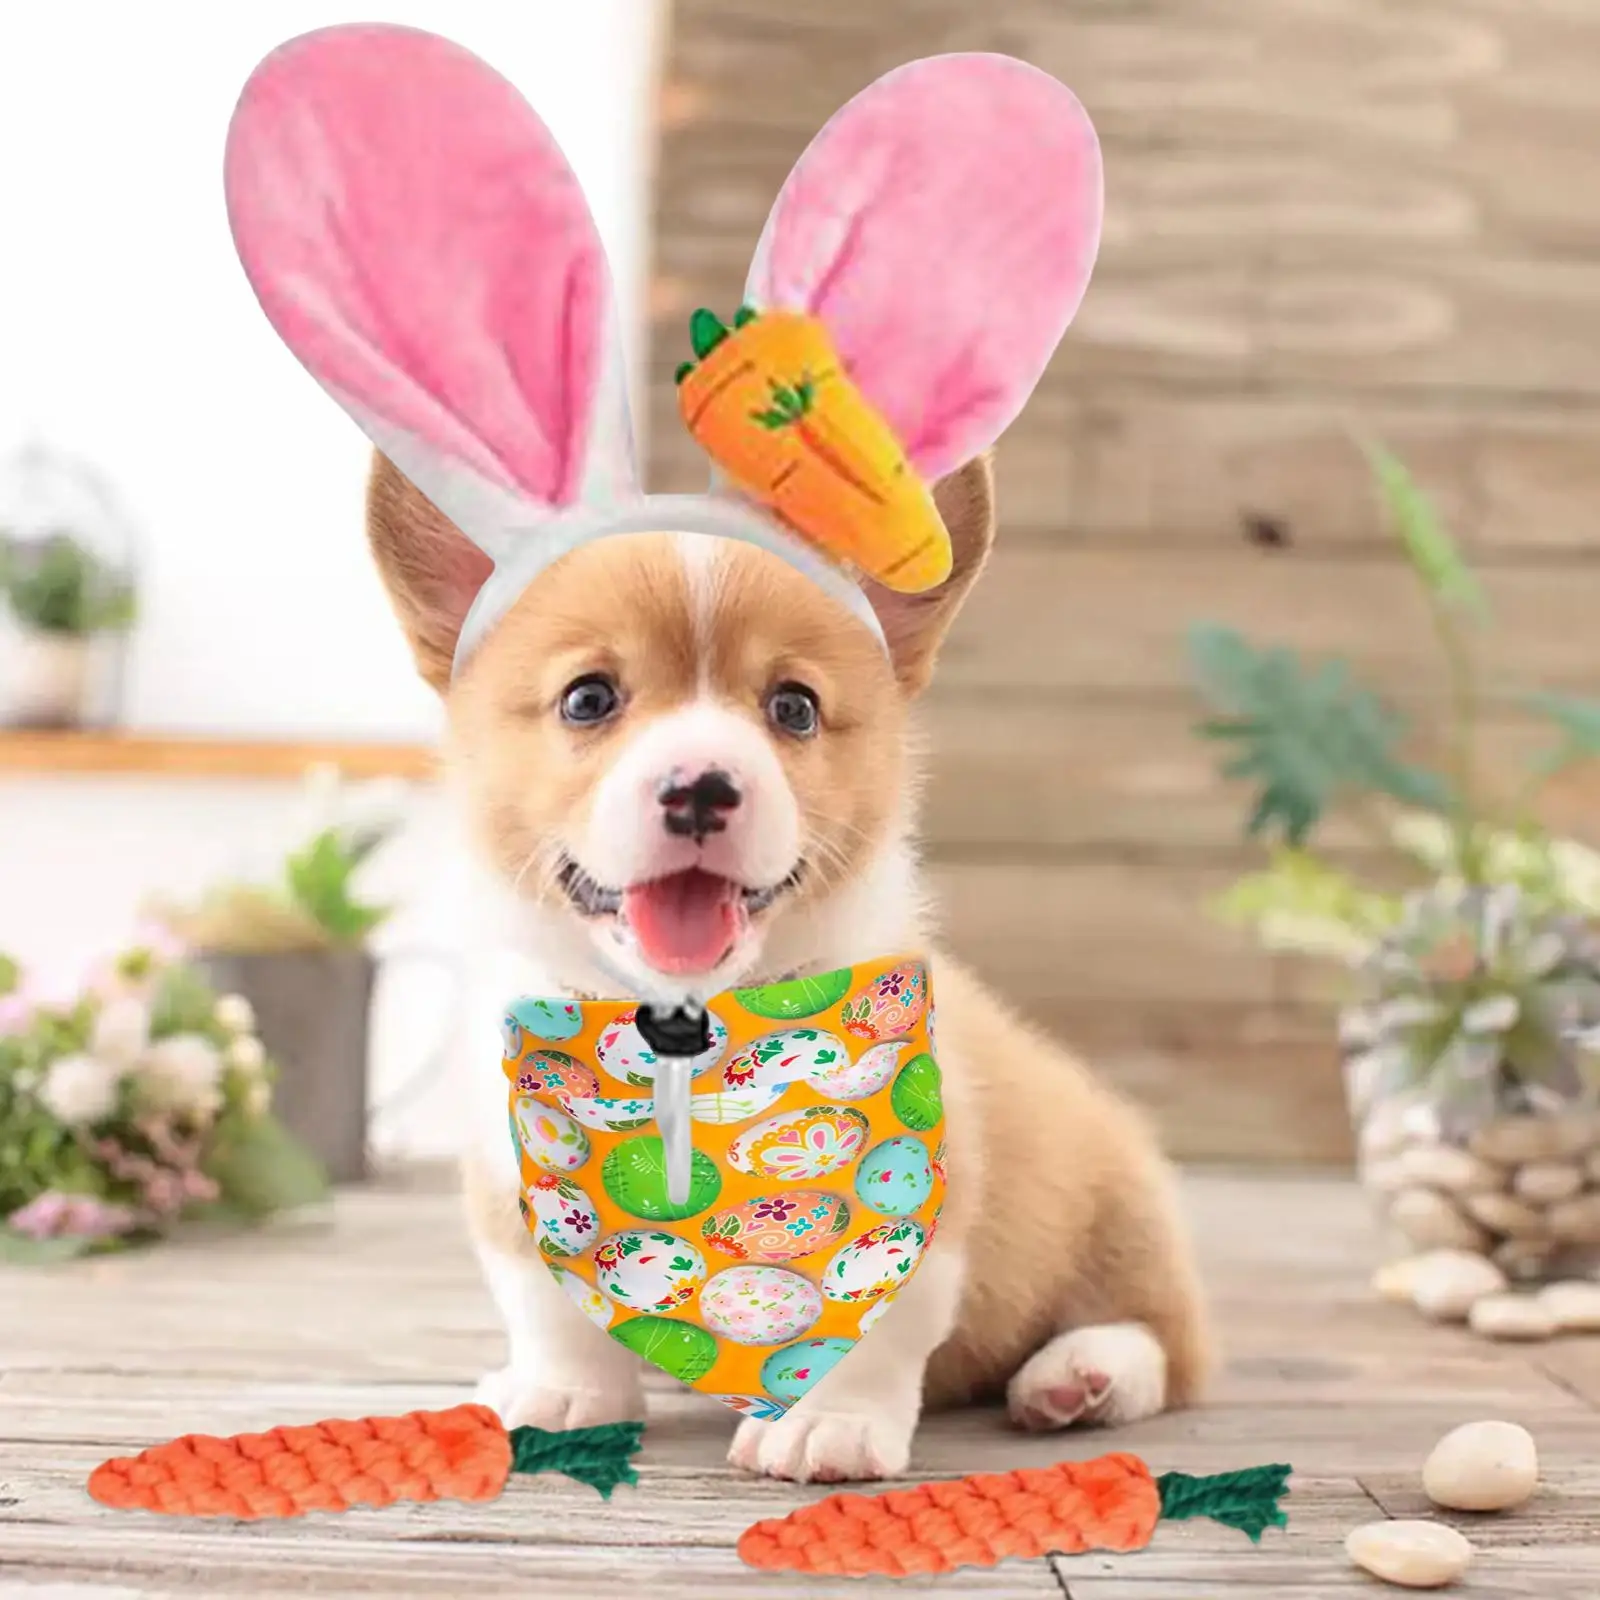 4x Dog Easter Costumes Triangle Bibs Rabbit Ear Headwear Carrot Shape Rope Teeth Cleaning Chew Toys Party Costume Accessories